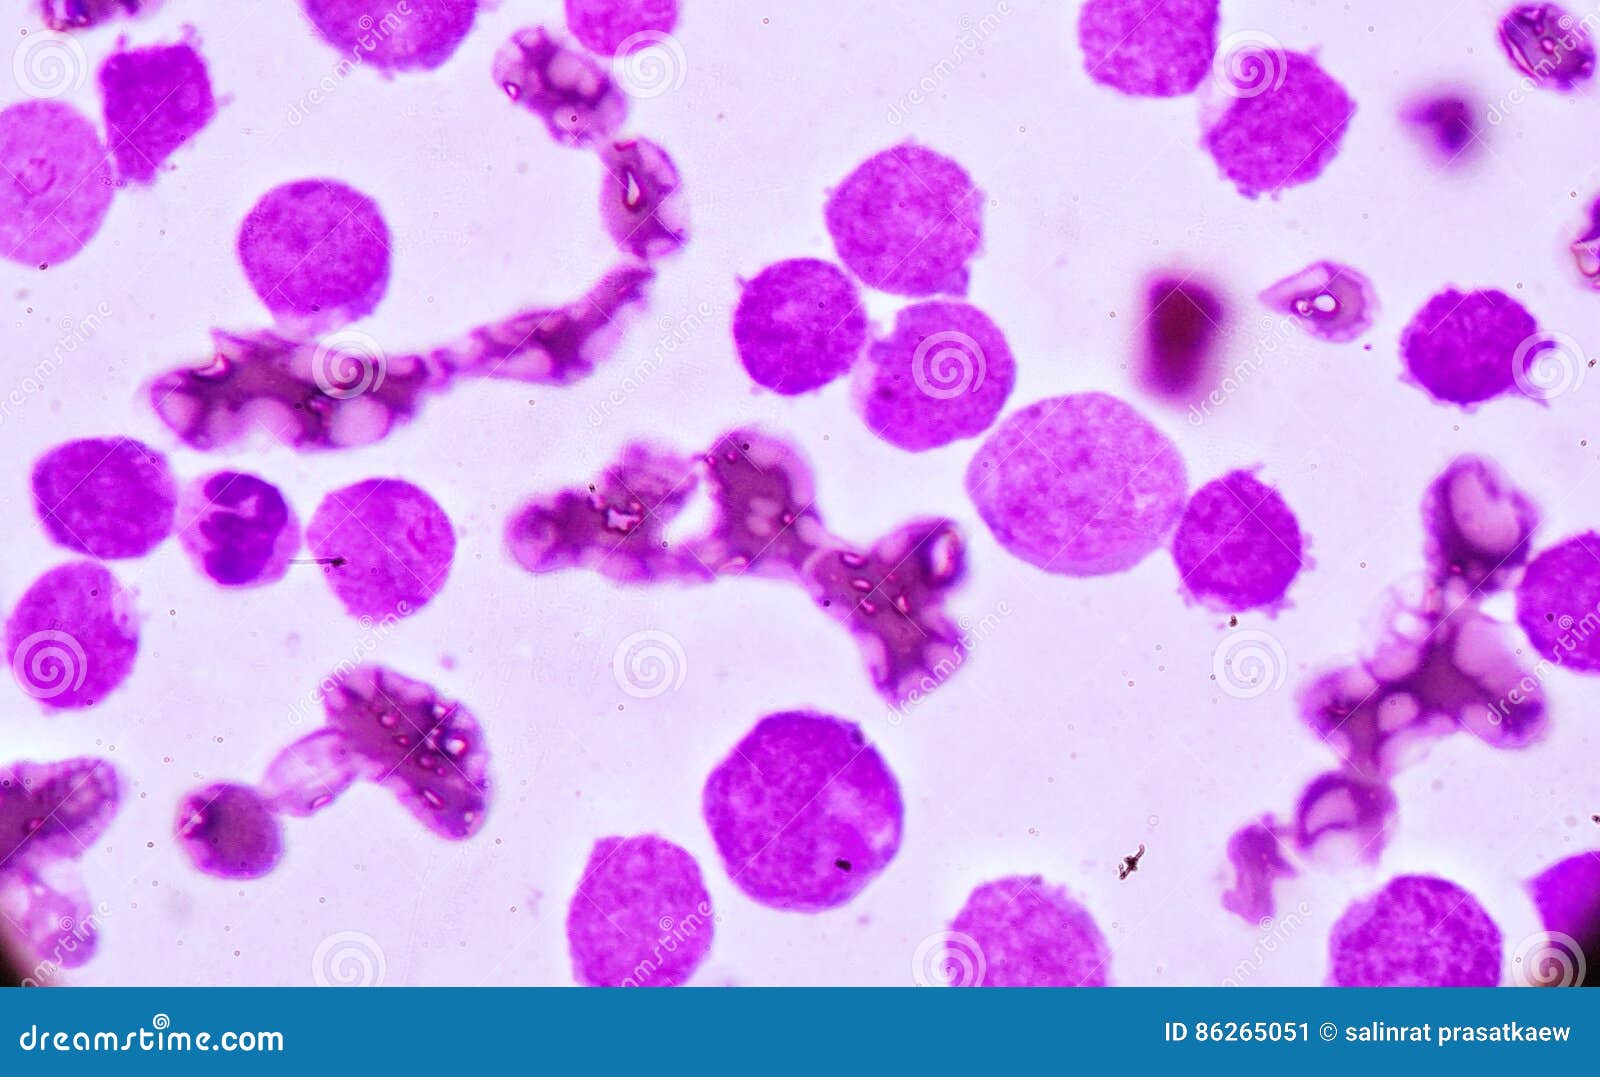 blood smear under microscopy showing on adult acute myeloid leukemia aml is a type of cancer in which the bone marrow makes abn